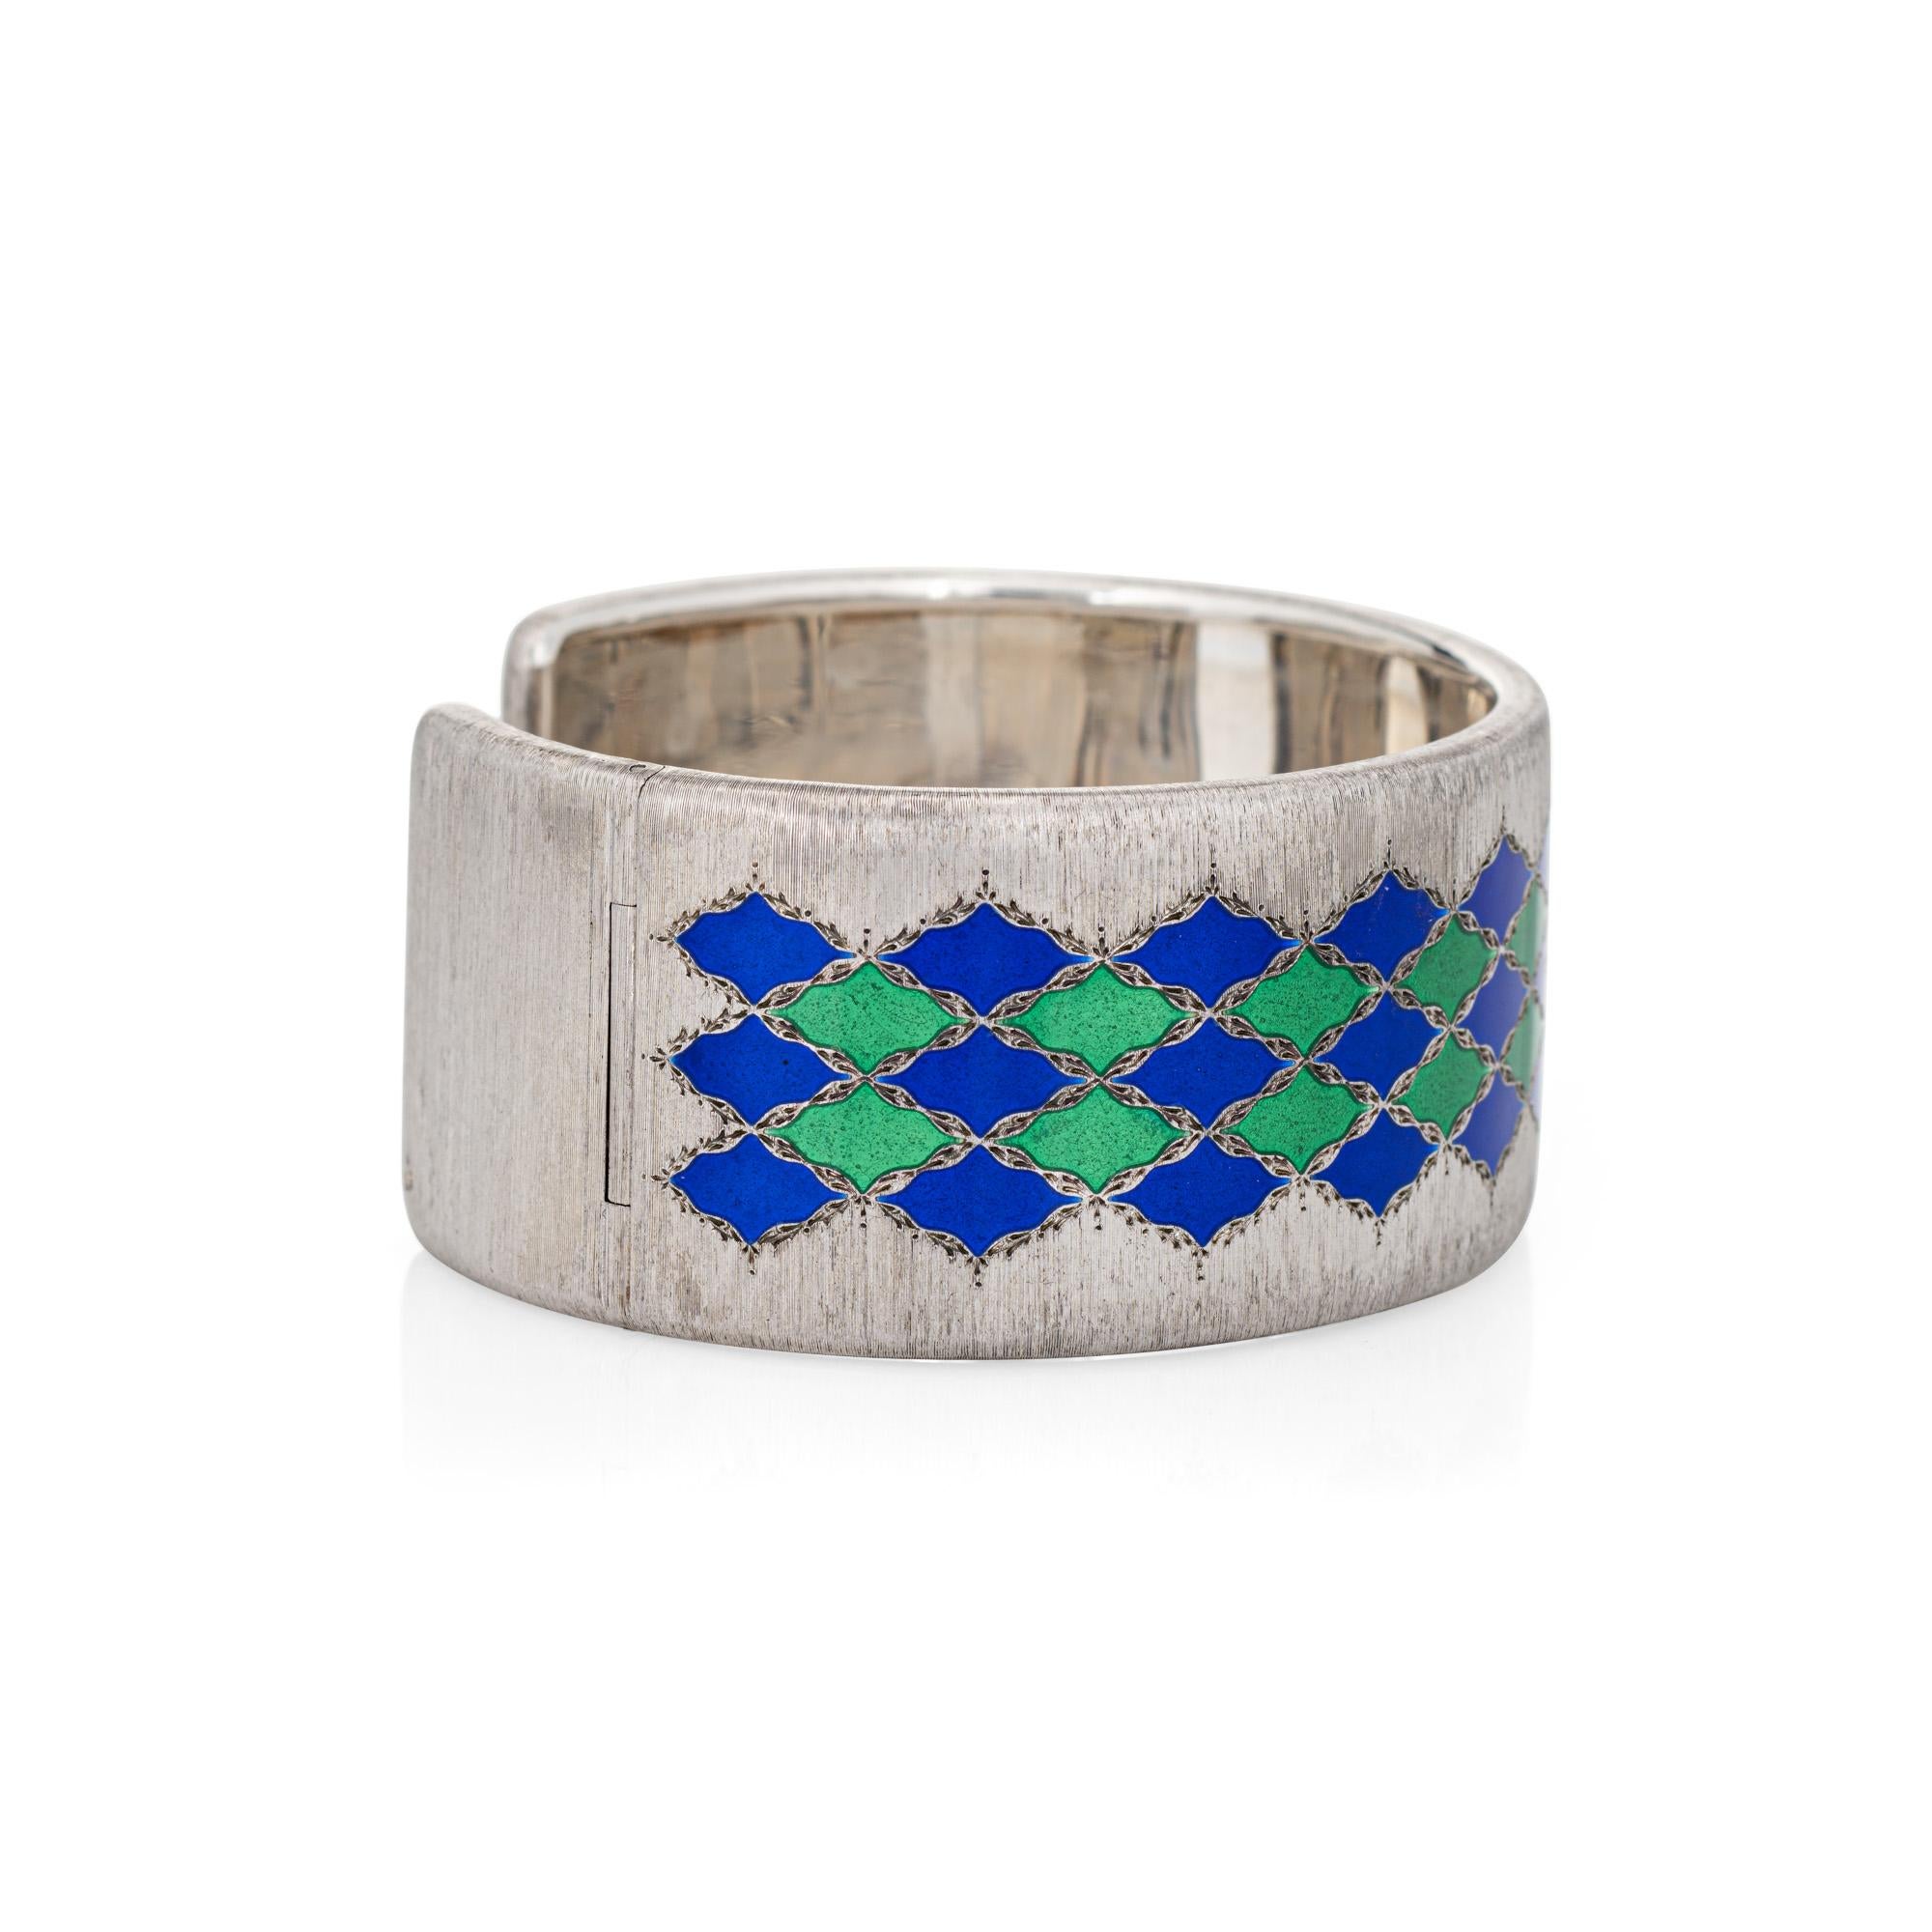 Stylish and finely detailed vintage Buccellati enamel cuff bracelet, crafted in sterling silver (circa 1970s).  

Vibrant blue and green enamel adorns the classic cuff within a renaissance style design motif. The intricate surface is silky to the